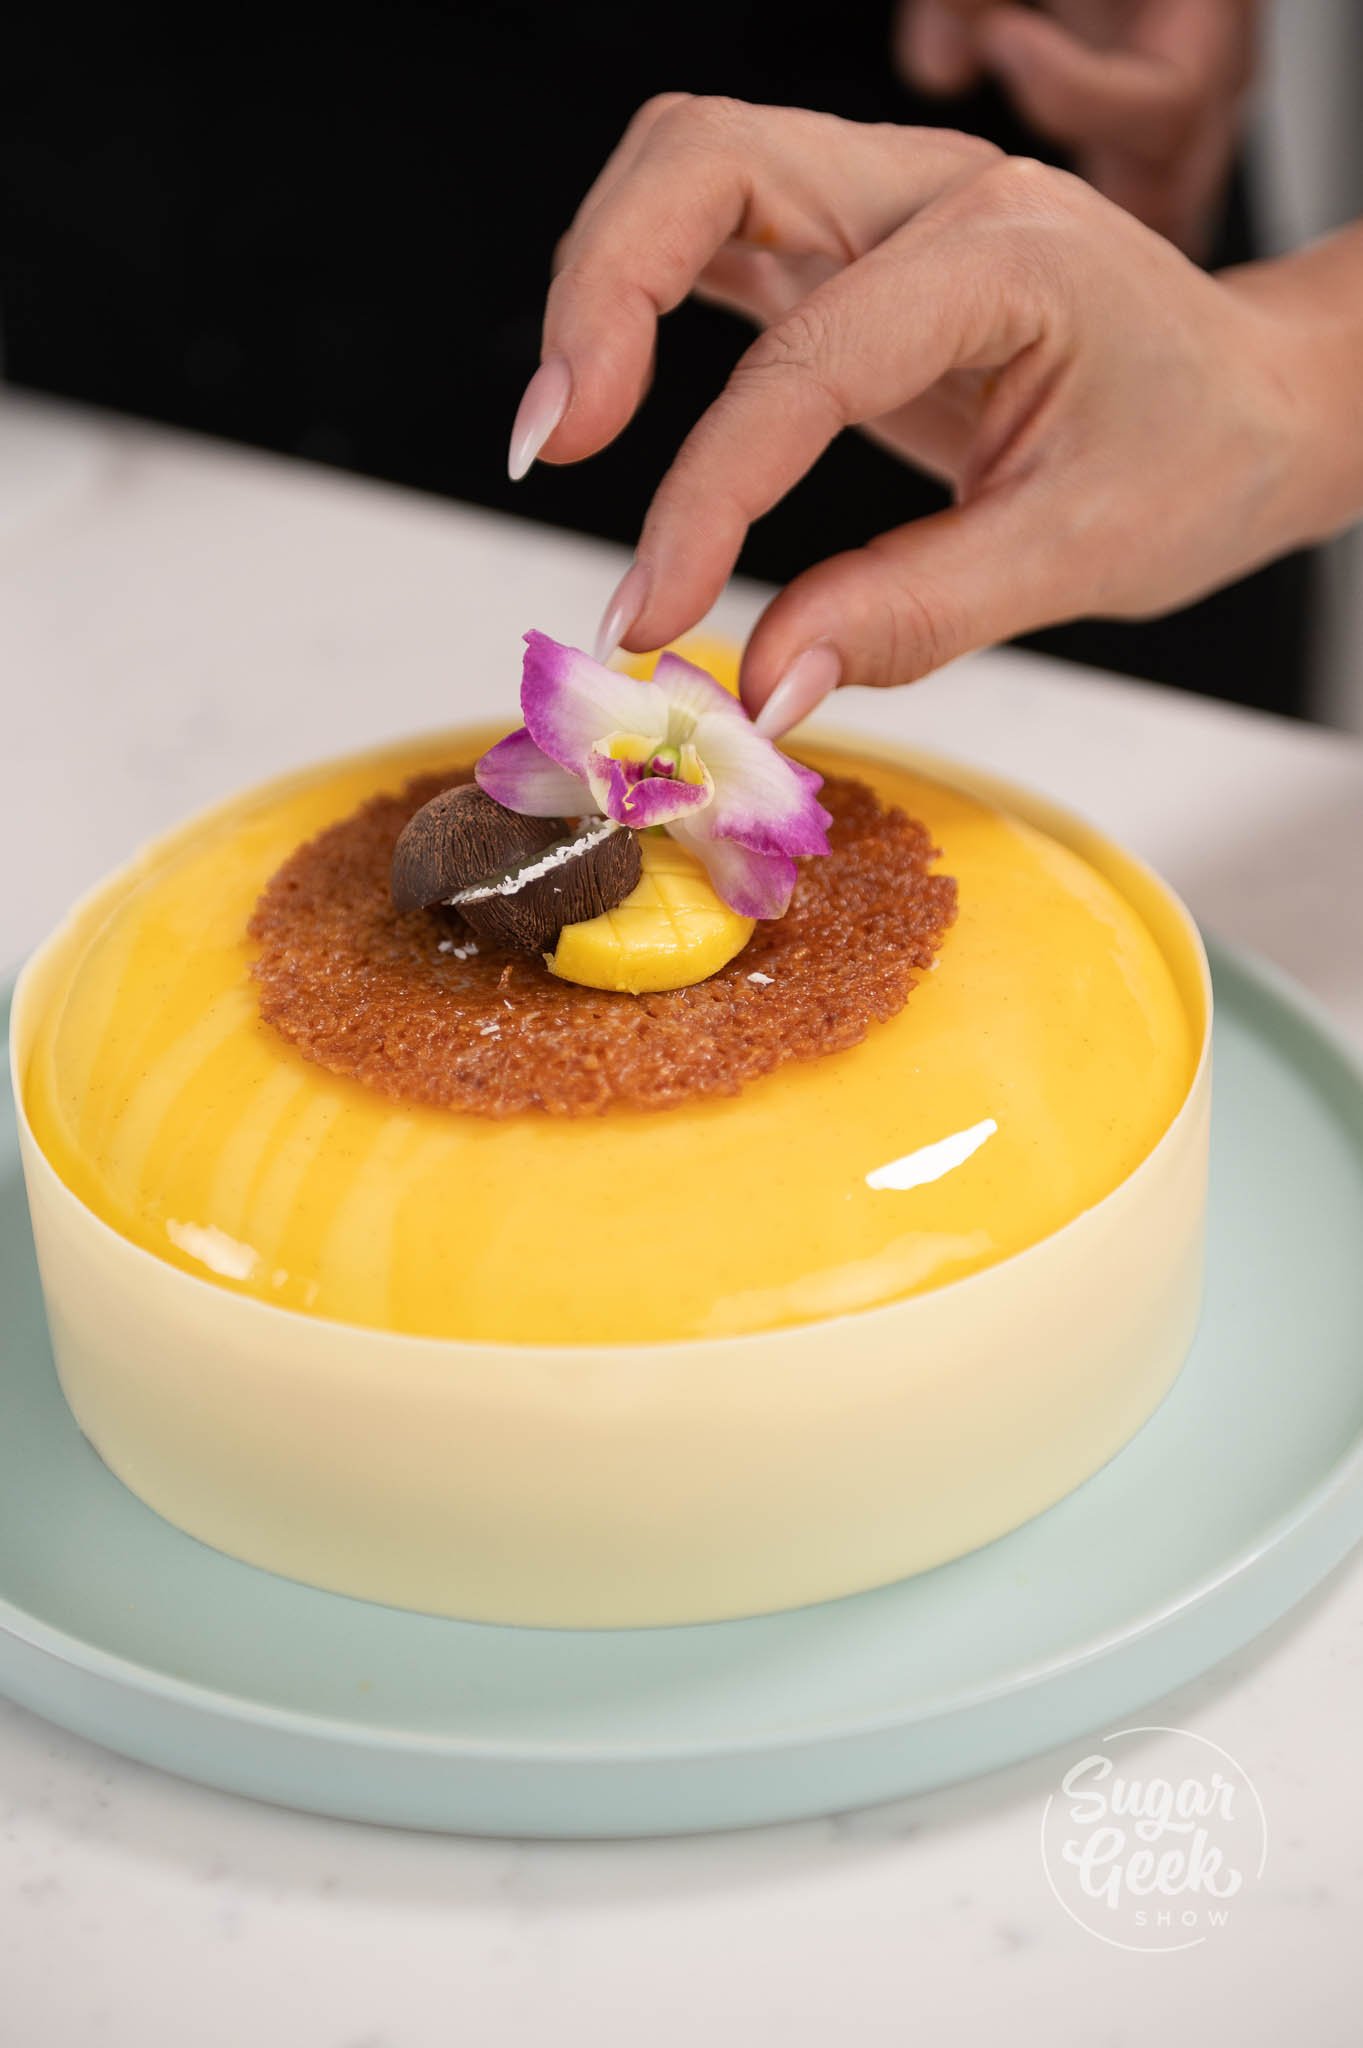 hand placing flower on top of decorated entremet.